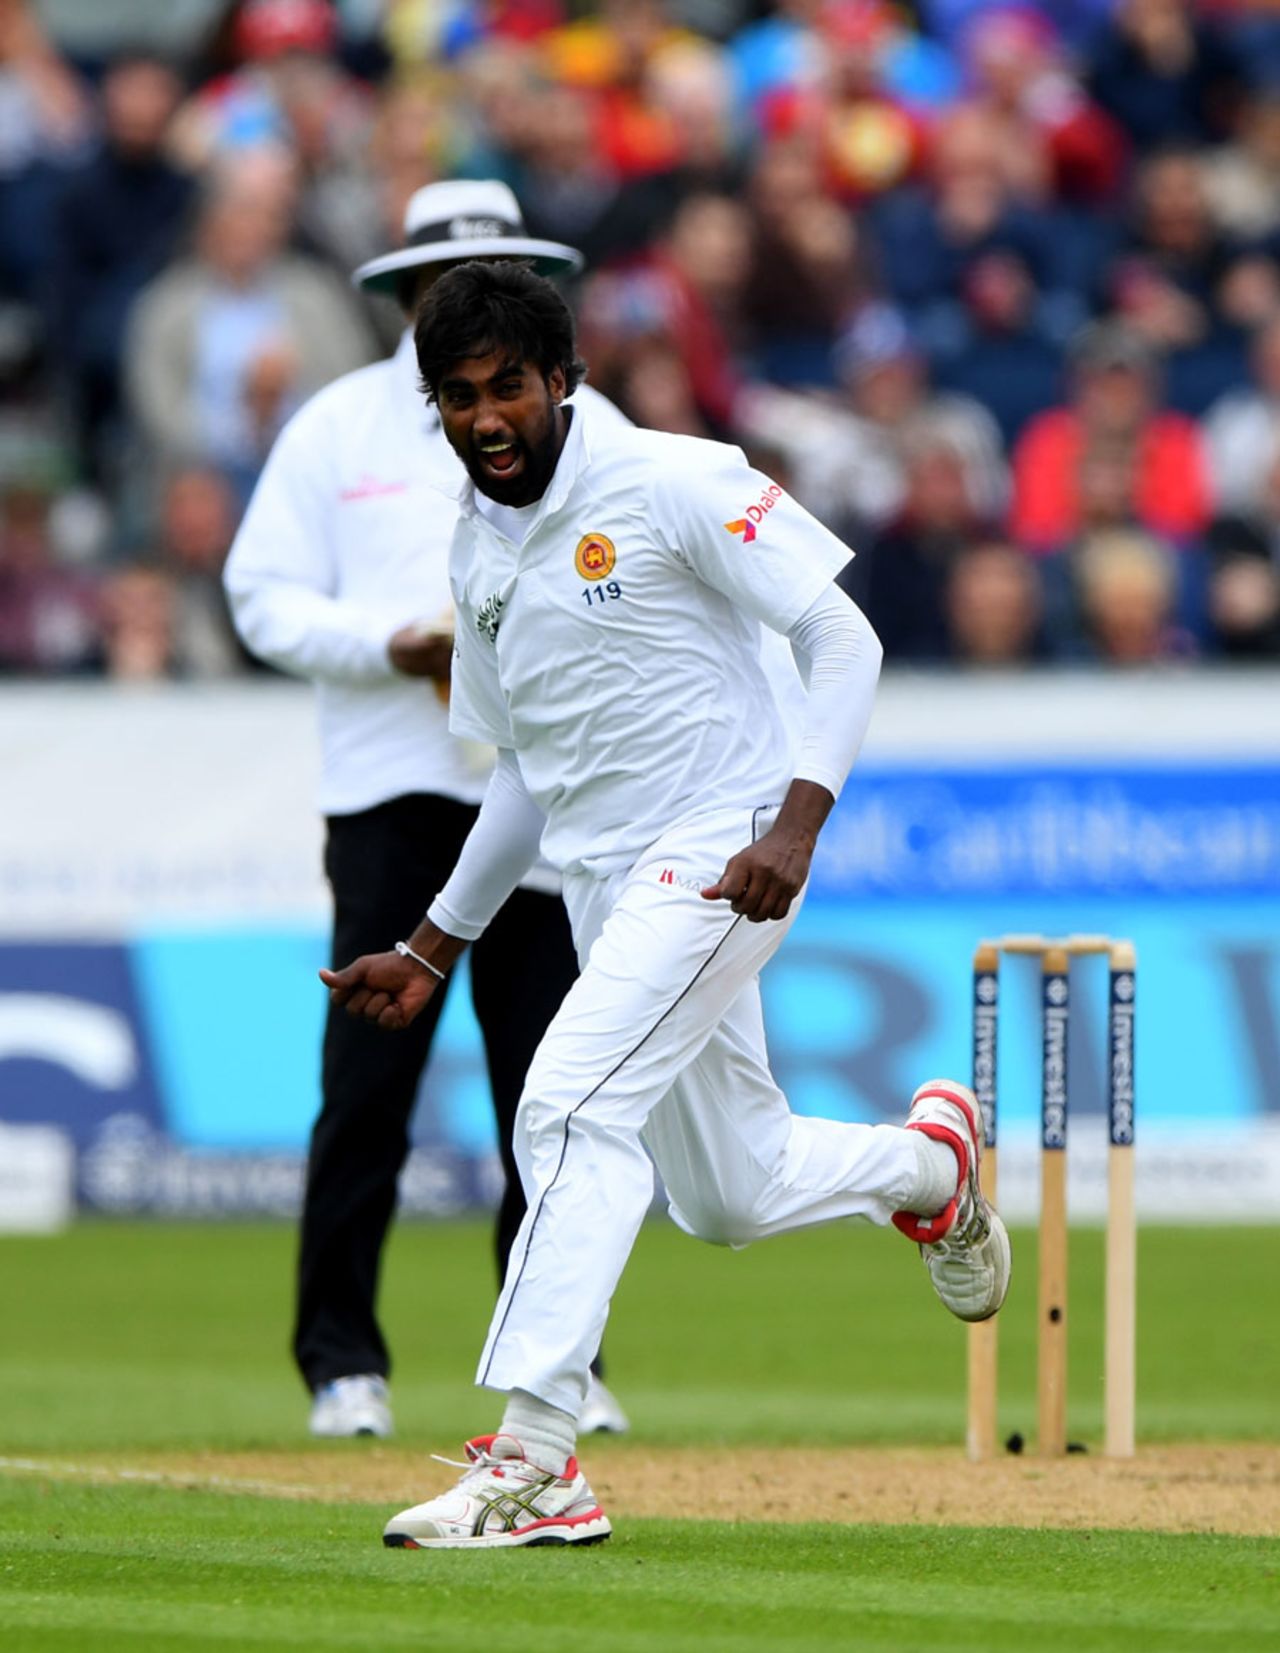 Nuwan Pradeep claimed the wicket of Stuart Broad, England v Sri Lanka, 2nd Test, Chester-le-Street, 2nd day, May 28, 2016